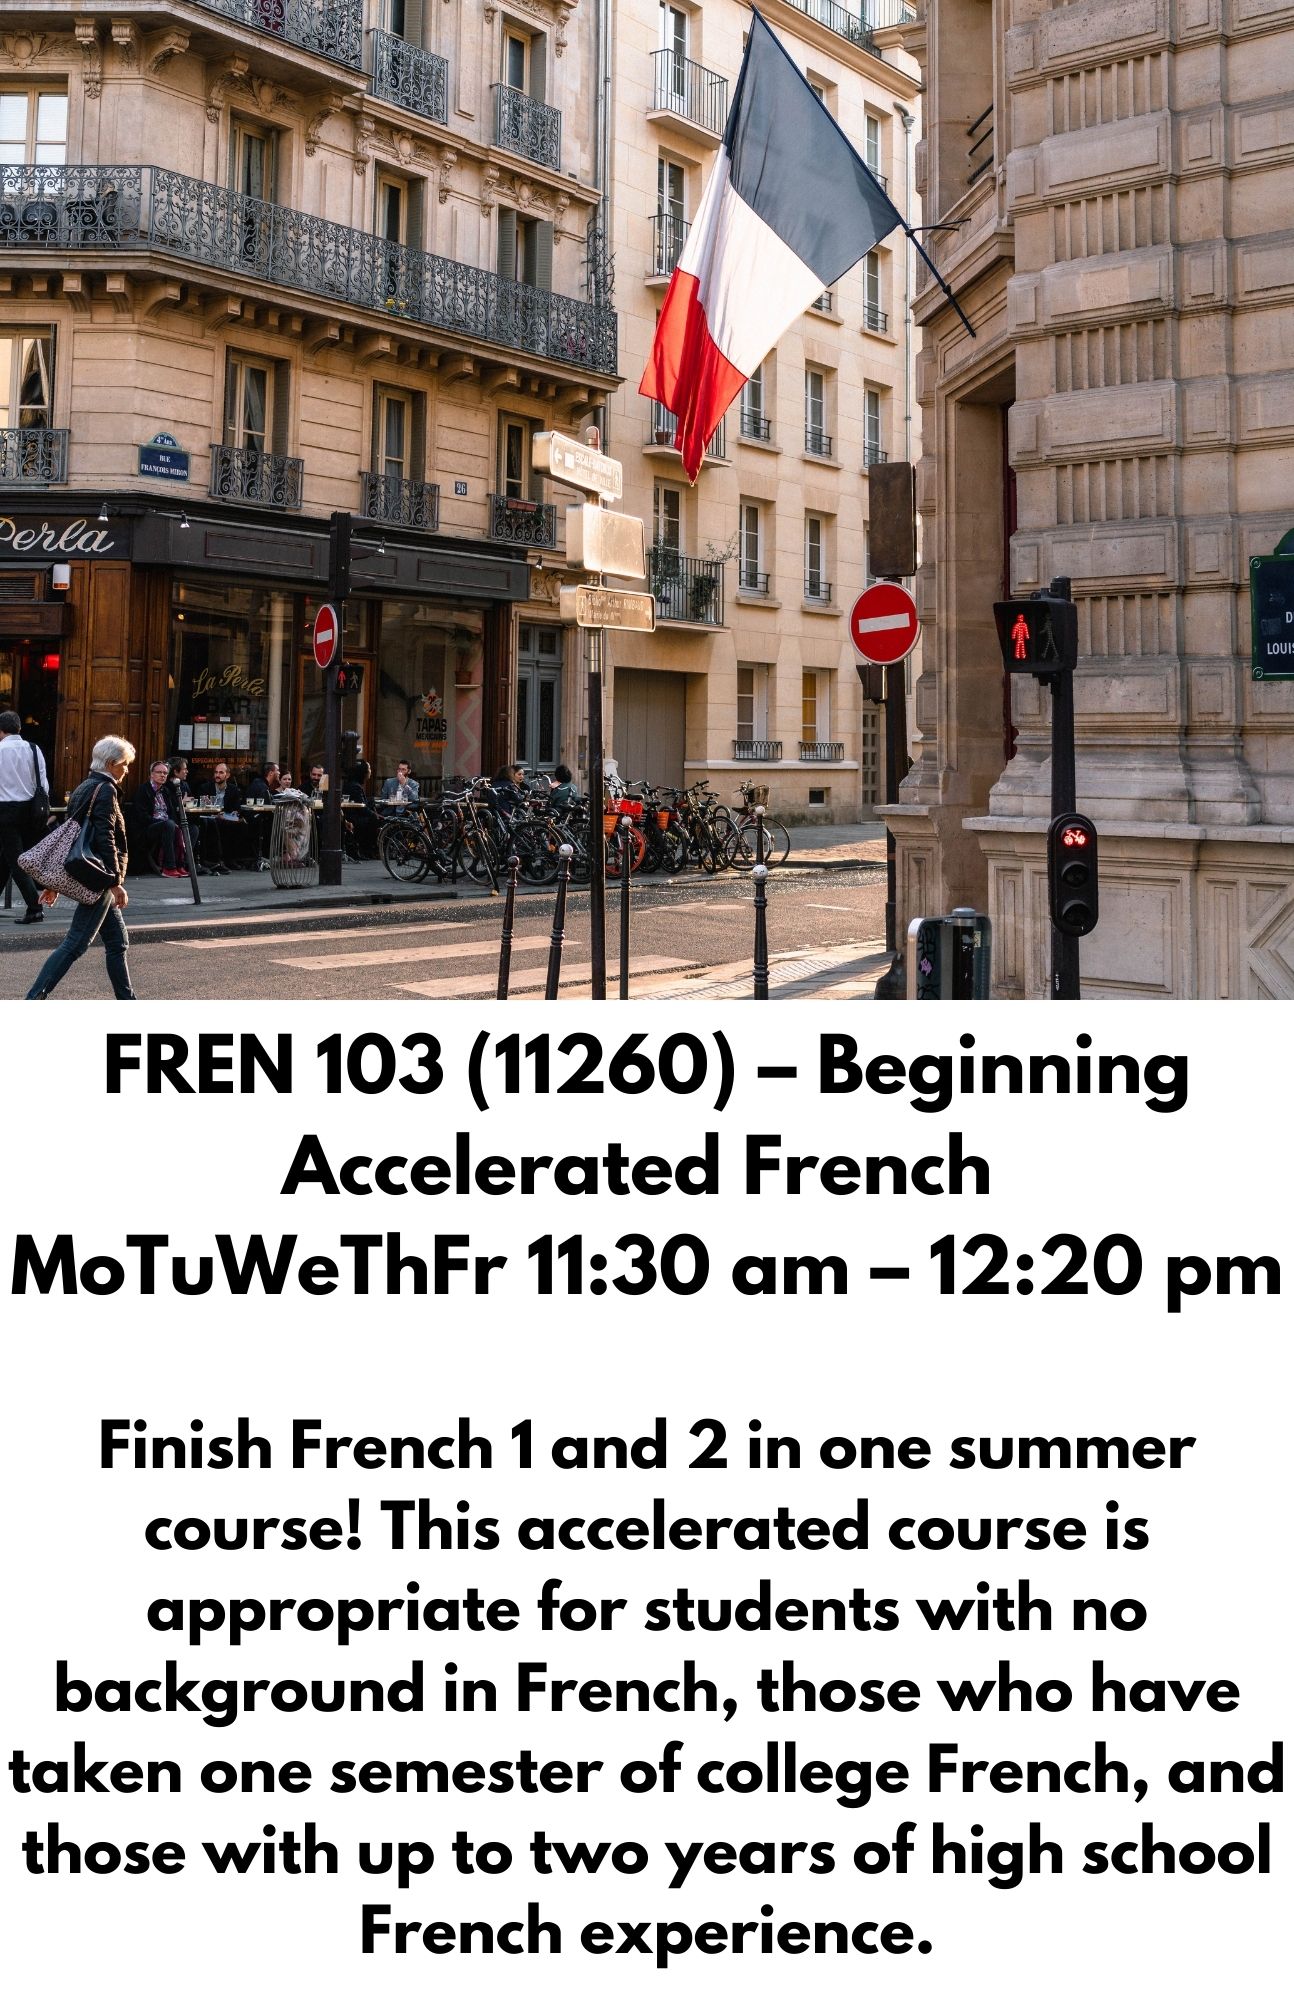 FREN 103 (11260) – Beginning Accelerated French  MoTuWeThFr 11:30 am – 12:20 pm  Finish French 1 and 2 in one summer course! This accelerated course is appropriate for students with no background in French, those who have taken one semester of college French, and those with up to two years of high school French experience.